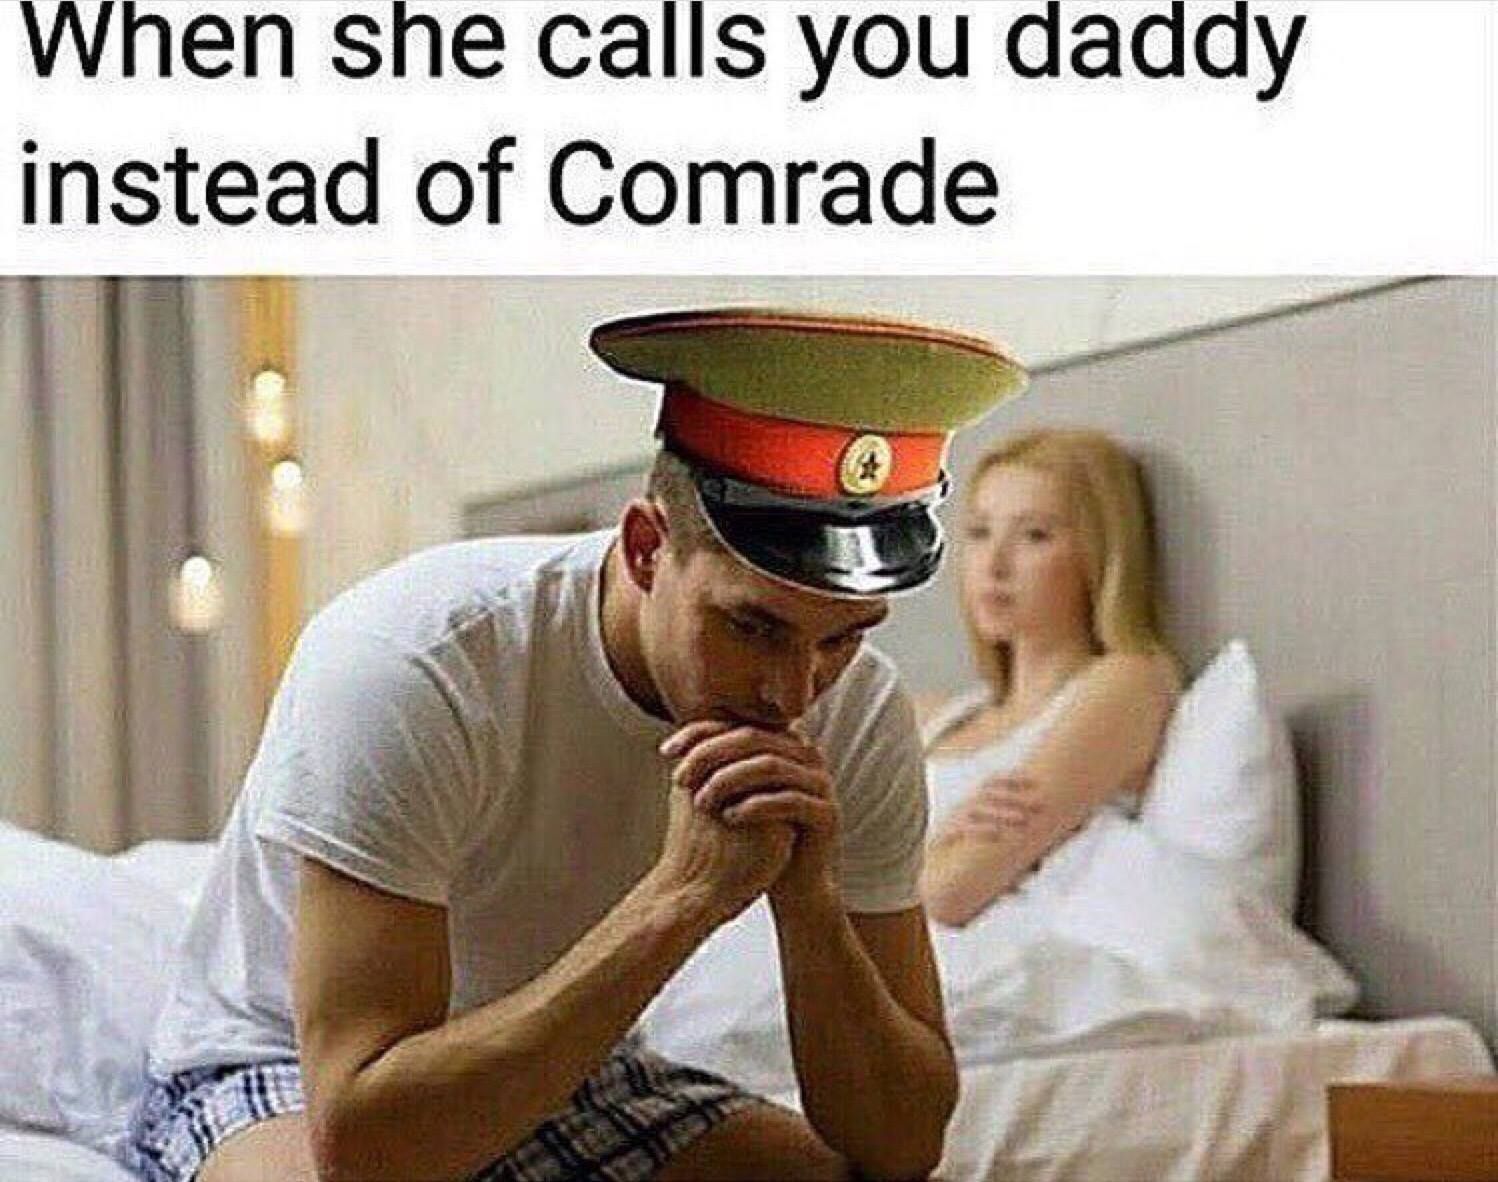 Why would you do that comrade